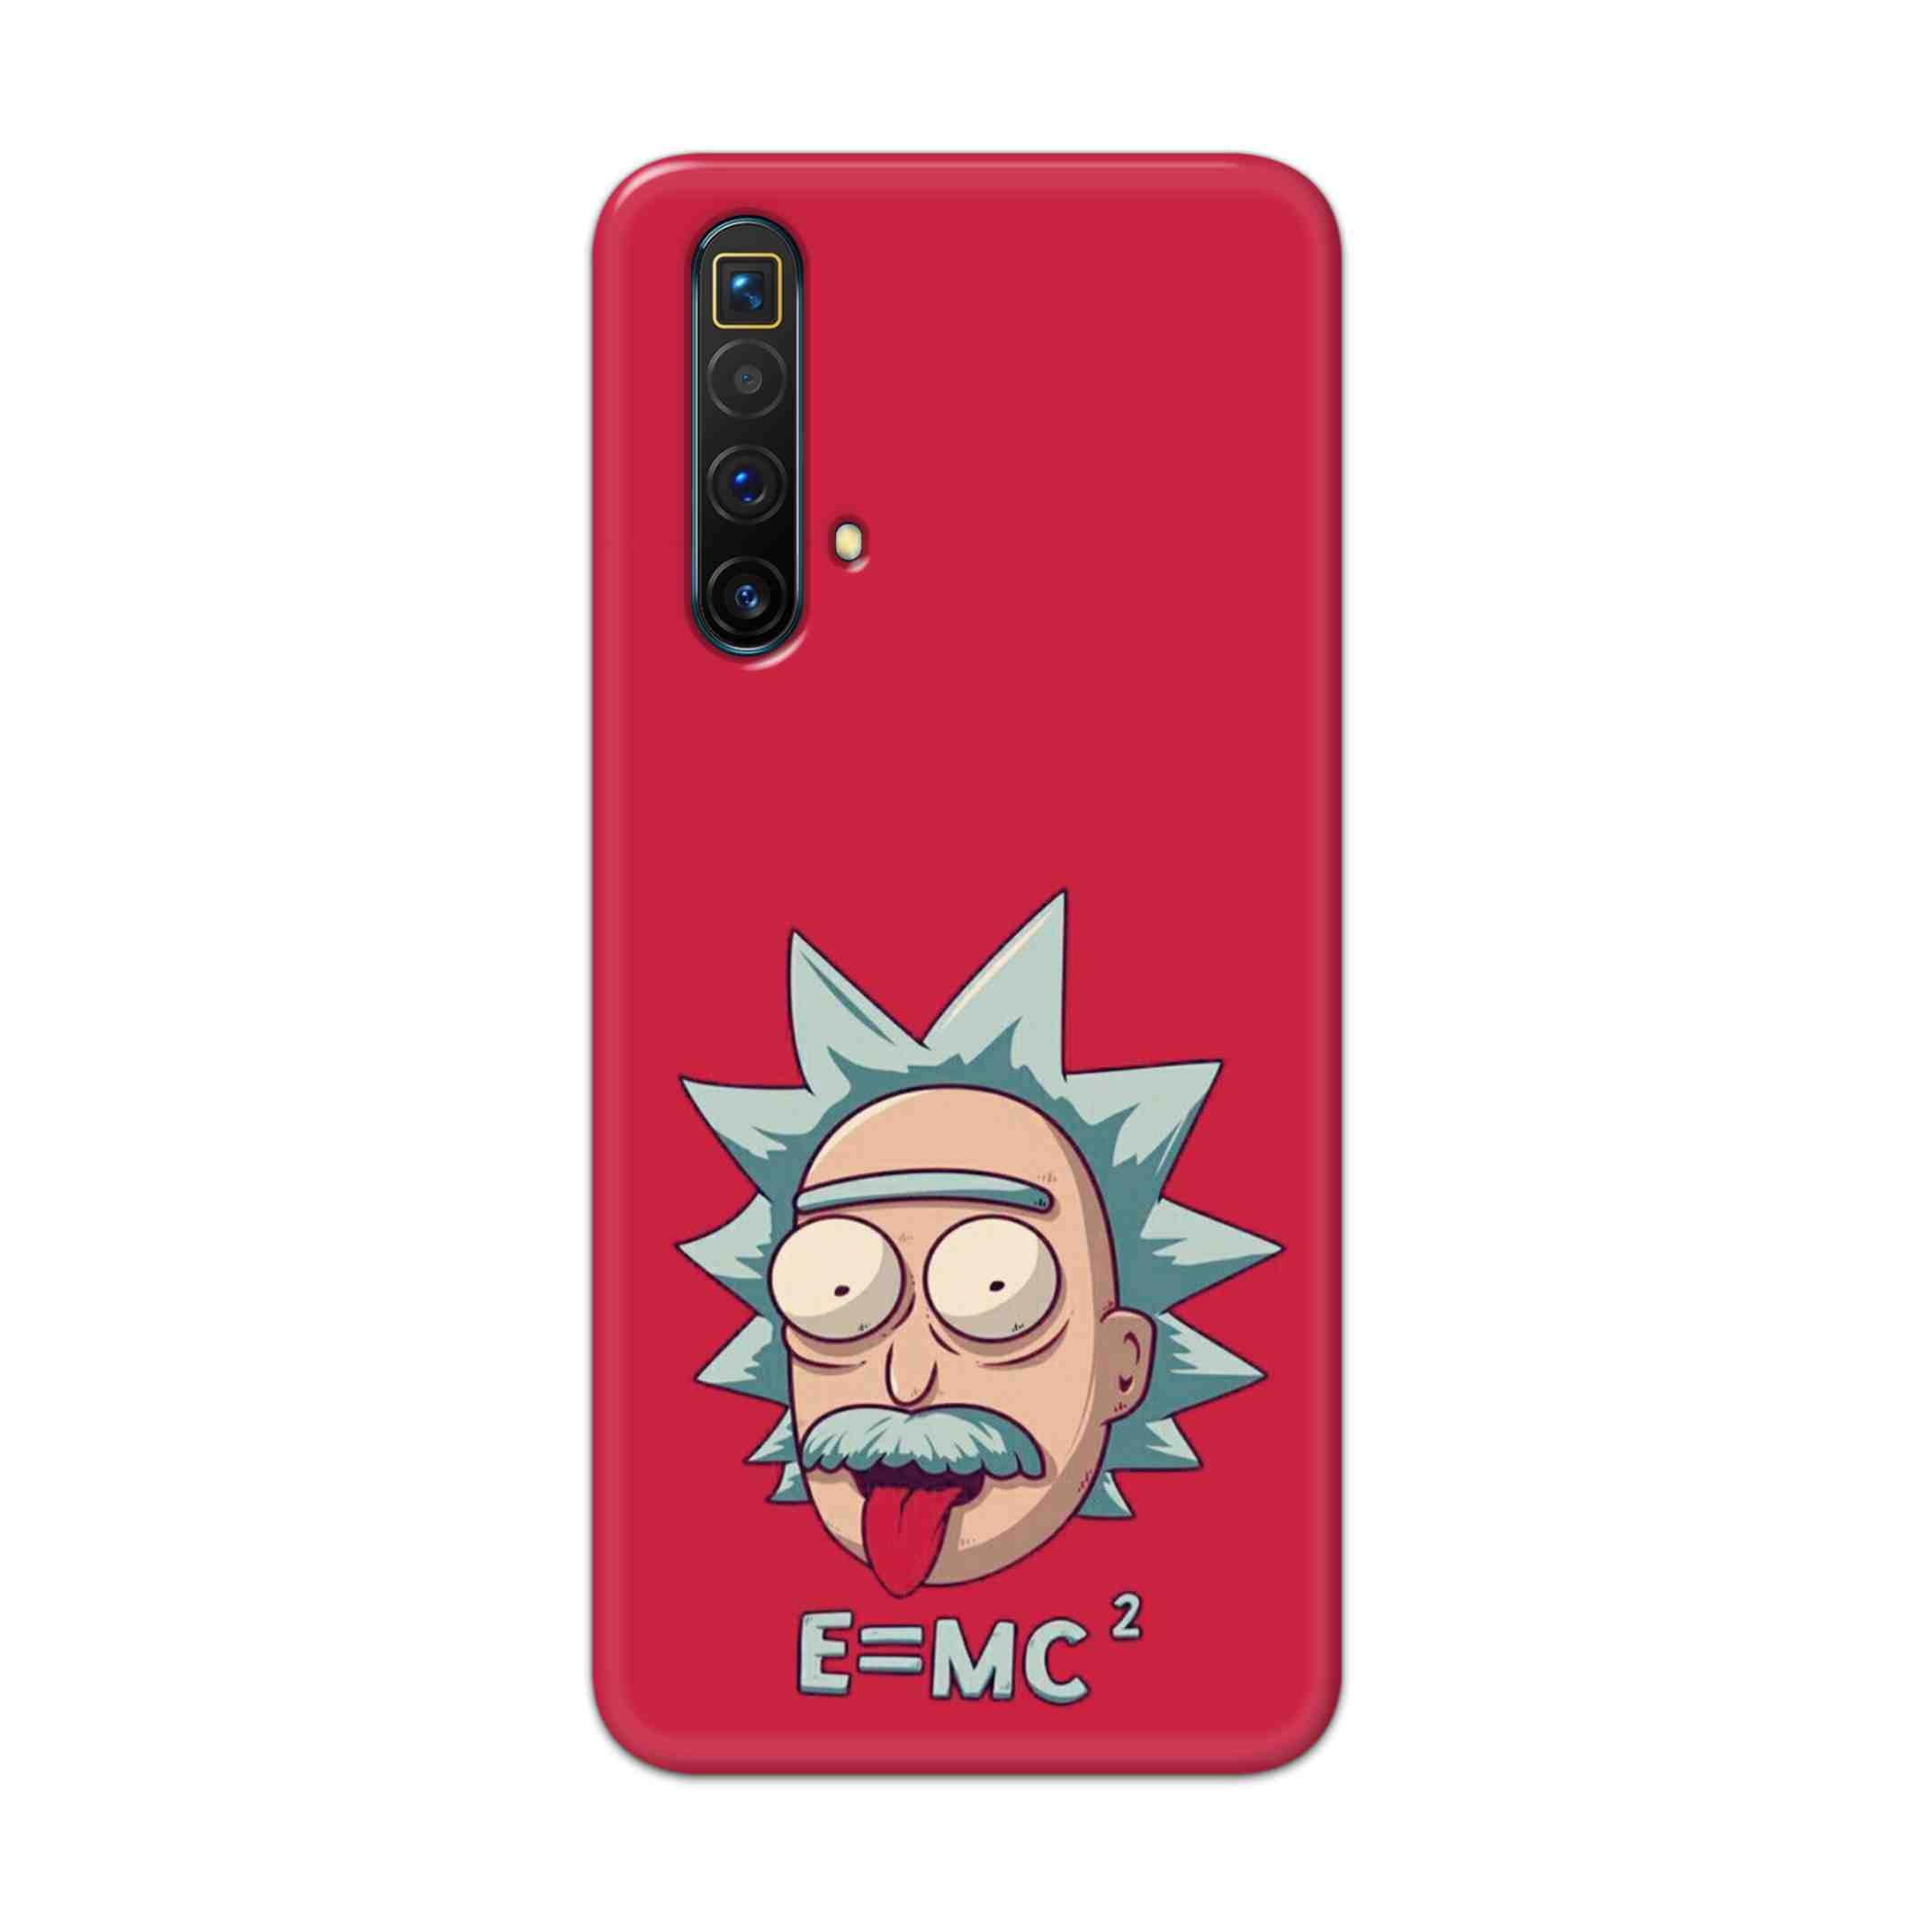 Buy E=Mc Hard Back Mobile Phone Case Cover For Realme X3 Superzoom Online